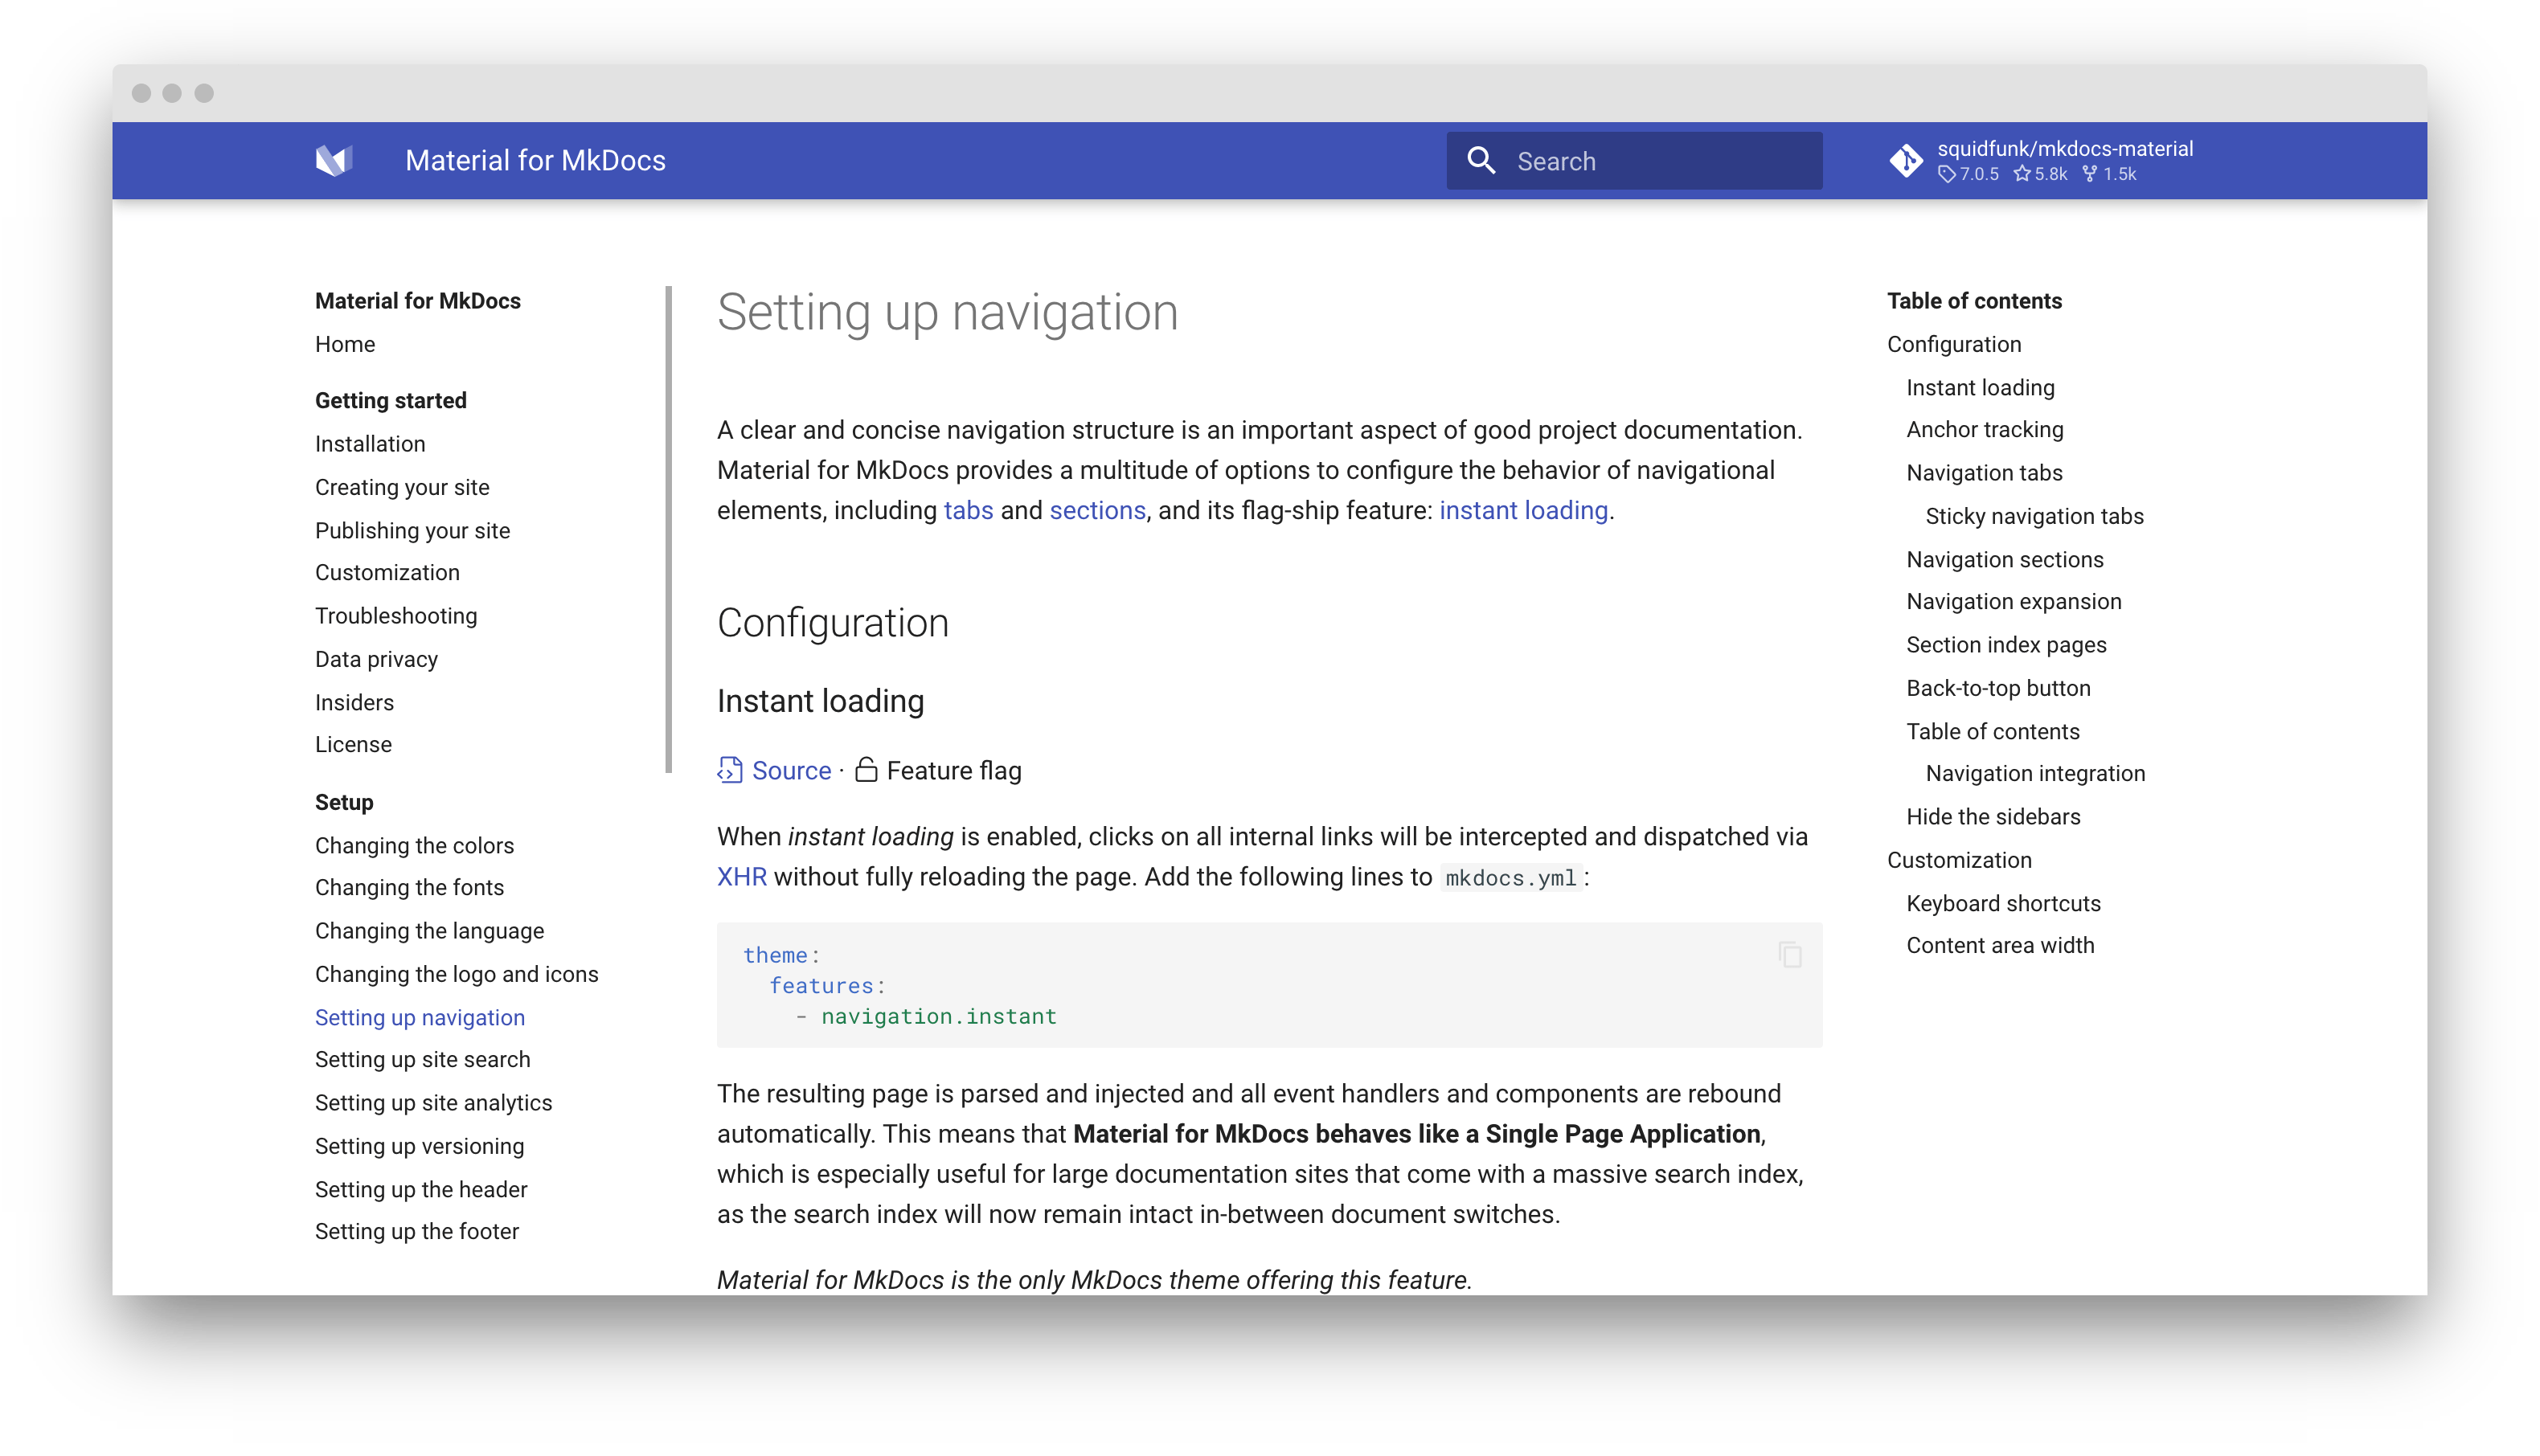 navigation.sections enabled